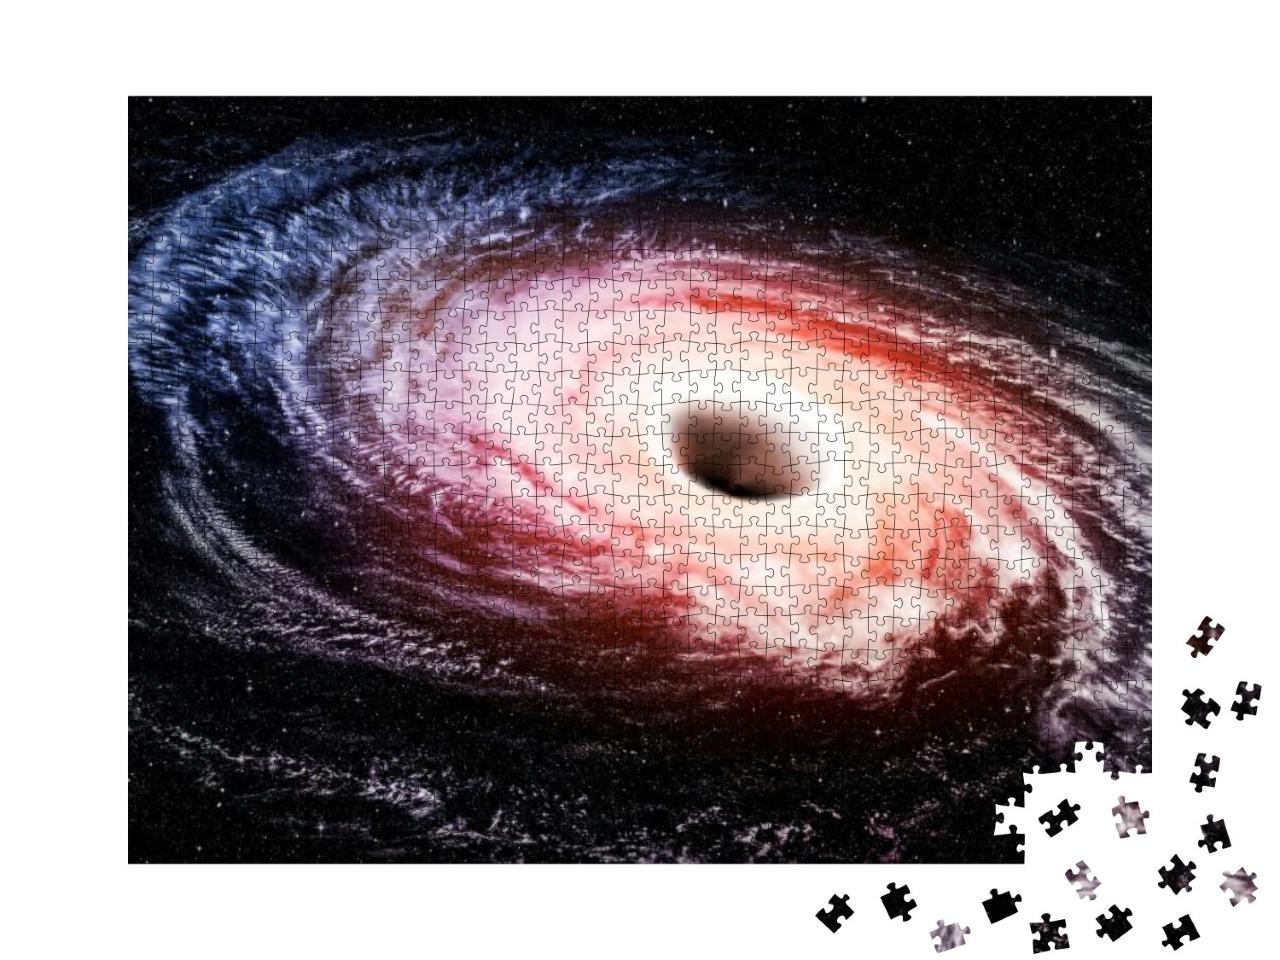 Hole Black Space Way Fiction Hydrogen Nebula Galaxy White... Jigsaw Puzzle with 1000 pieces